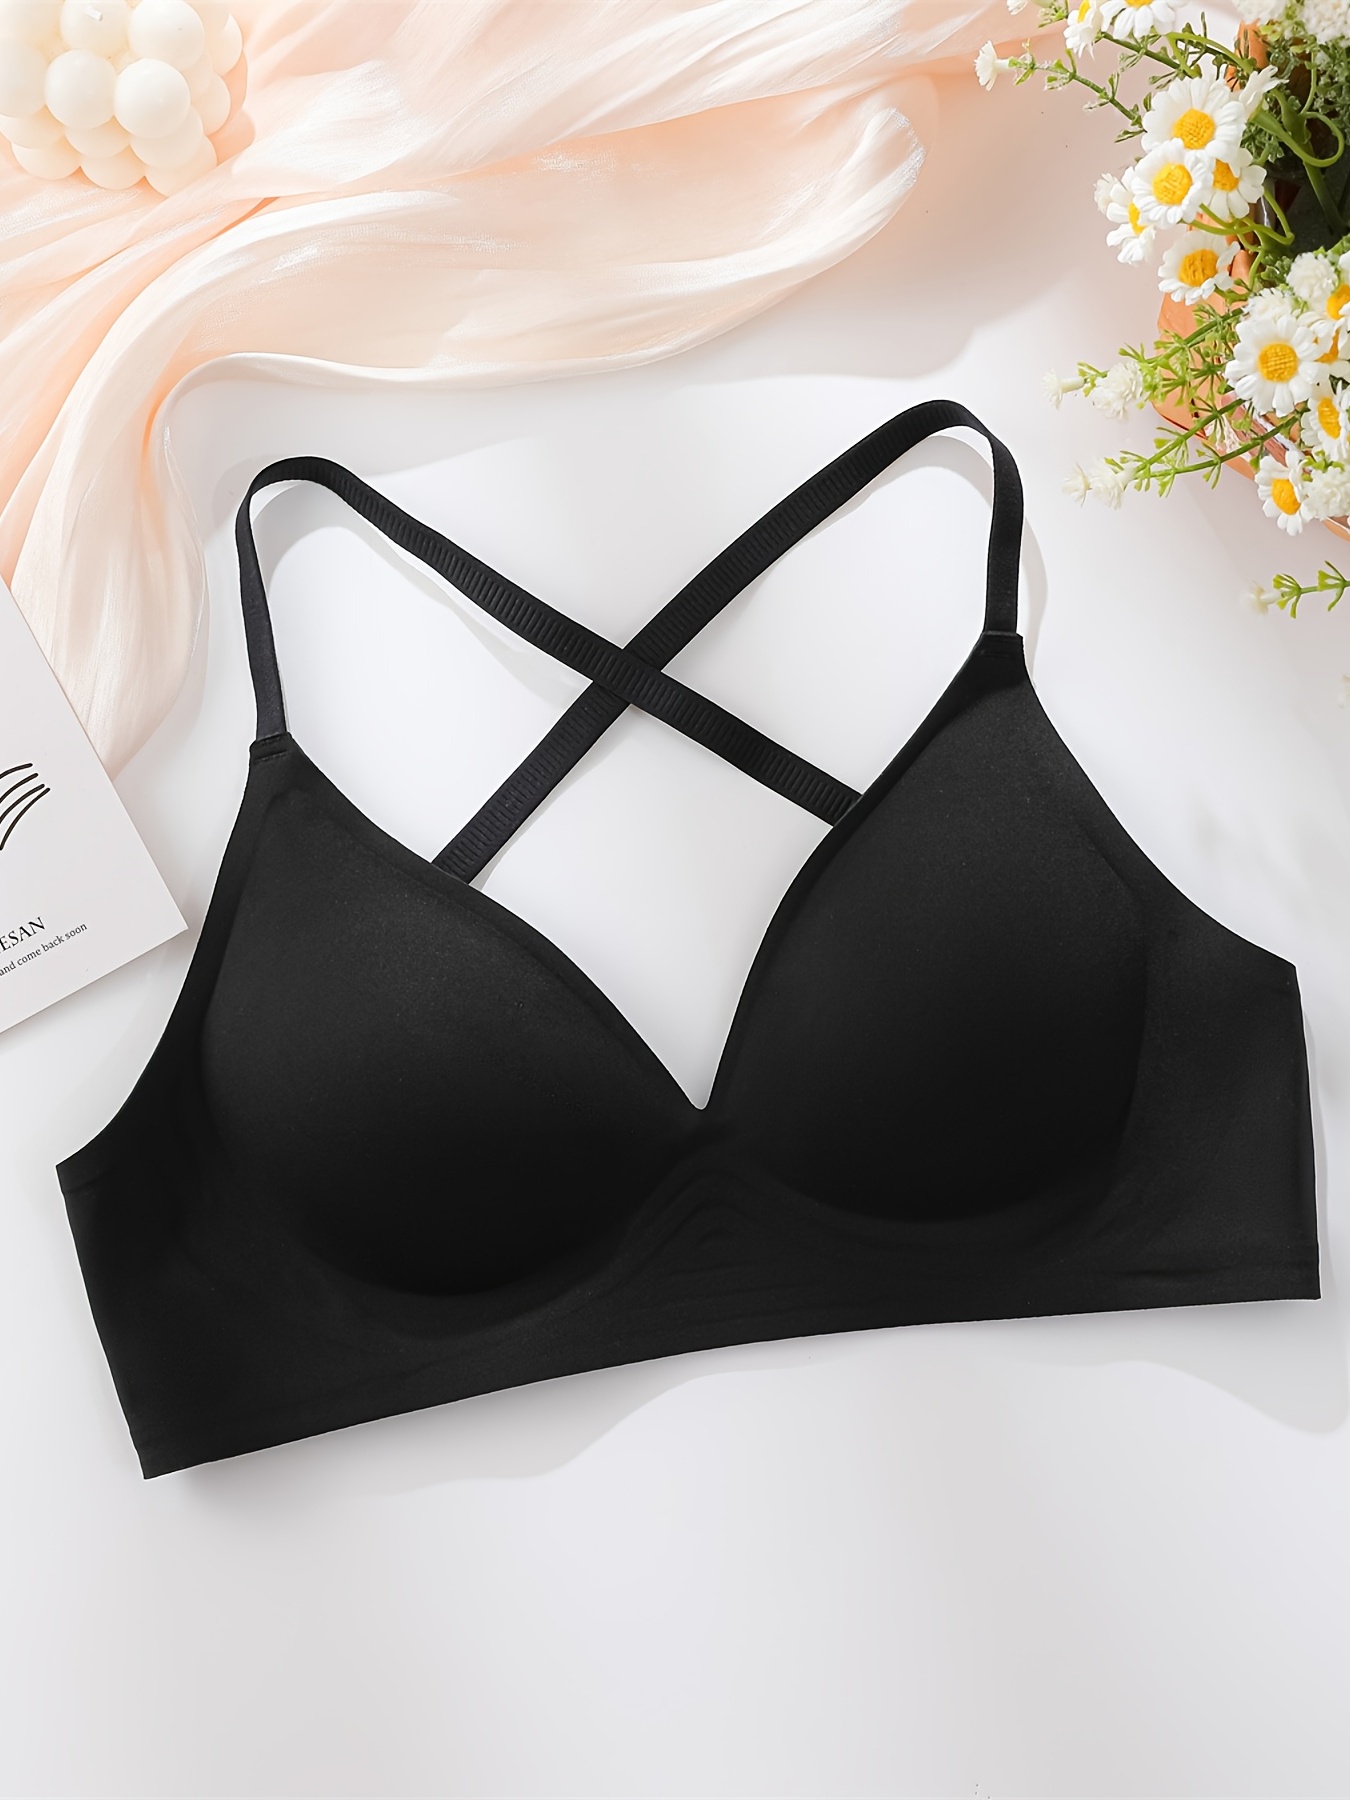 Bras for Wome Thin Small Adjustable Cover Wireless Push up Bra for